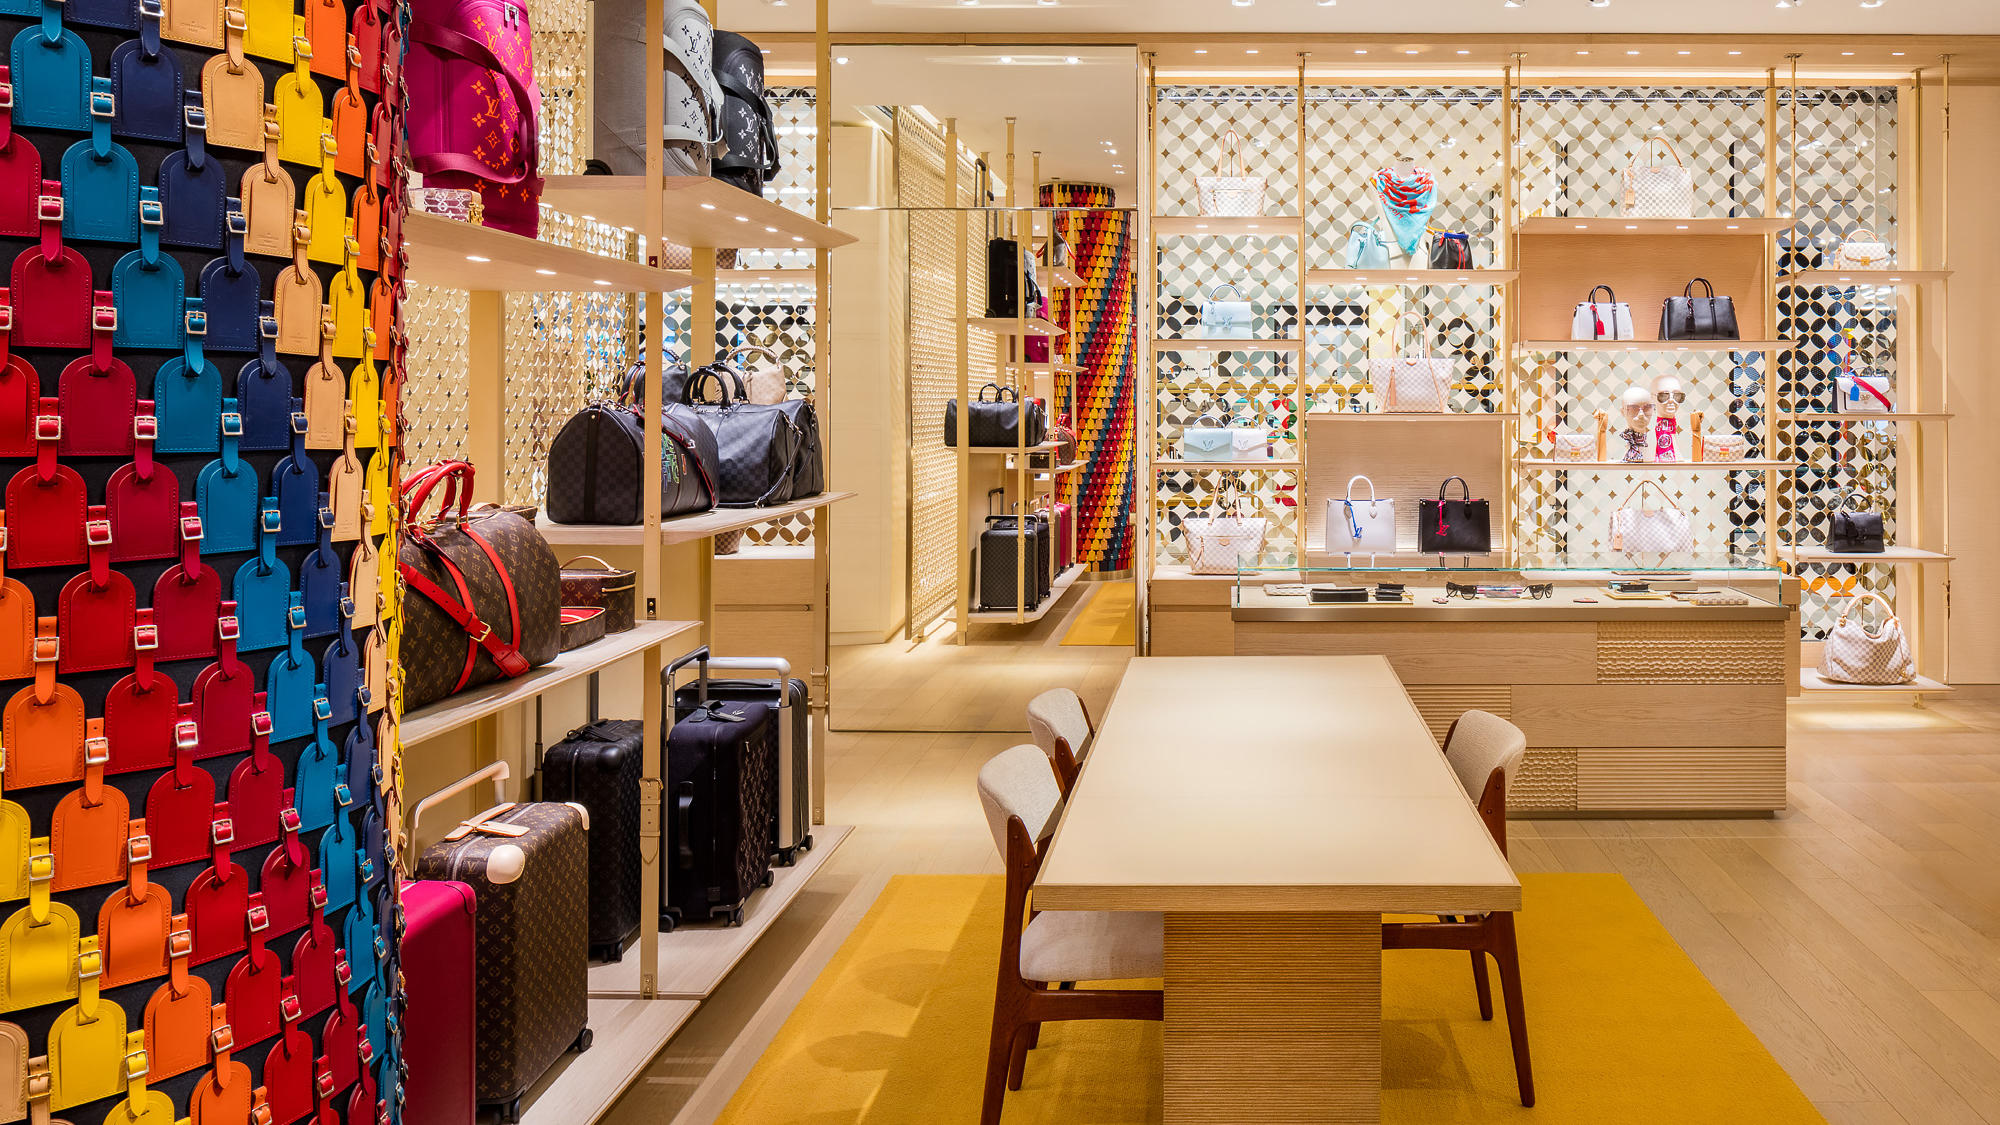 Louis Vuitton Bloomingdale's Valley Fair, located on the Ground Floor